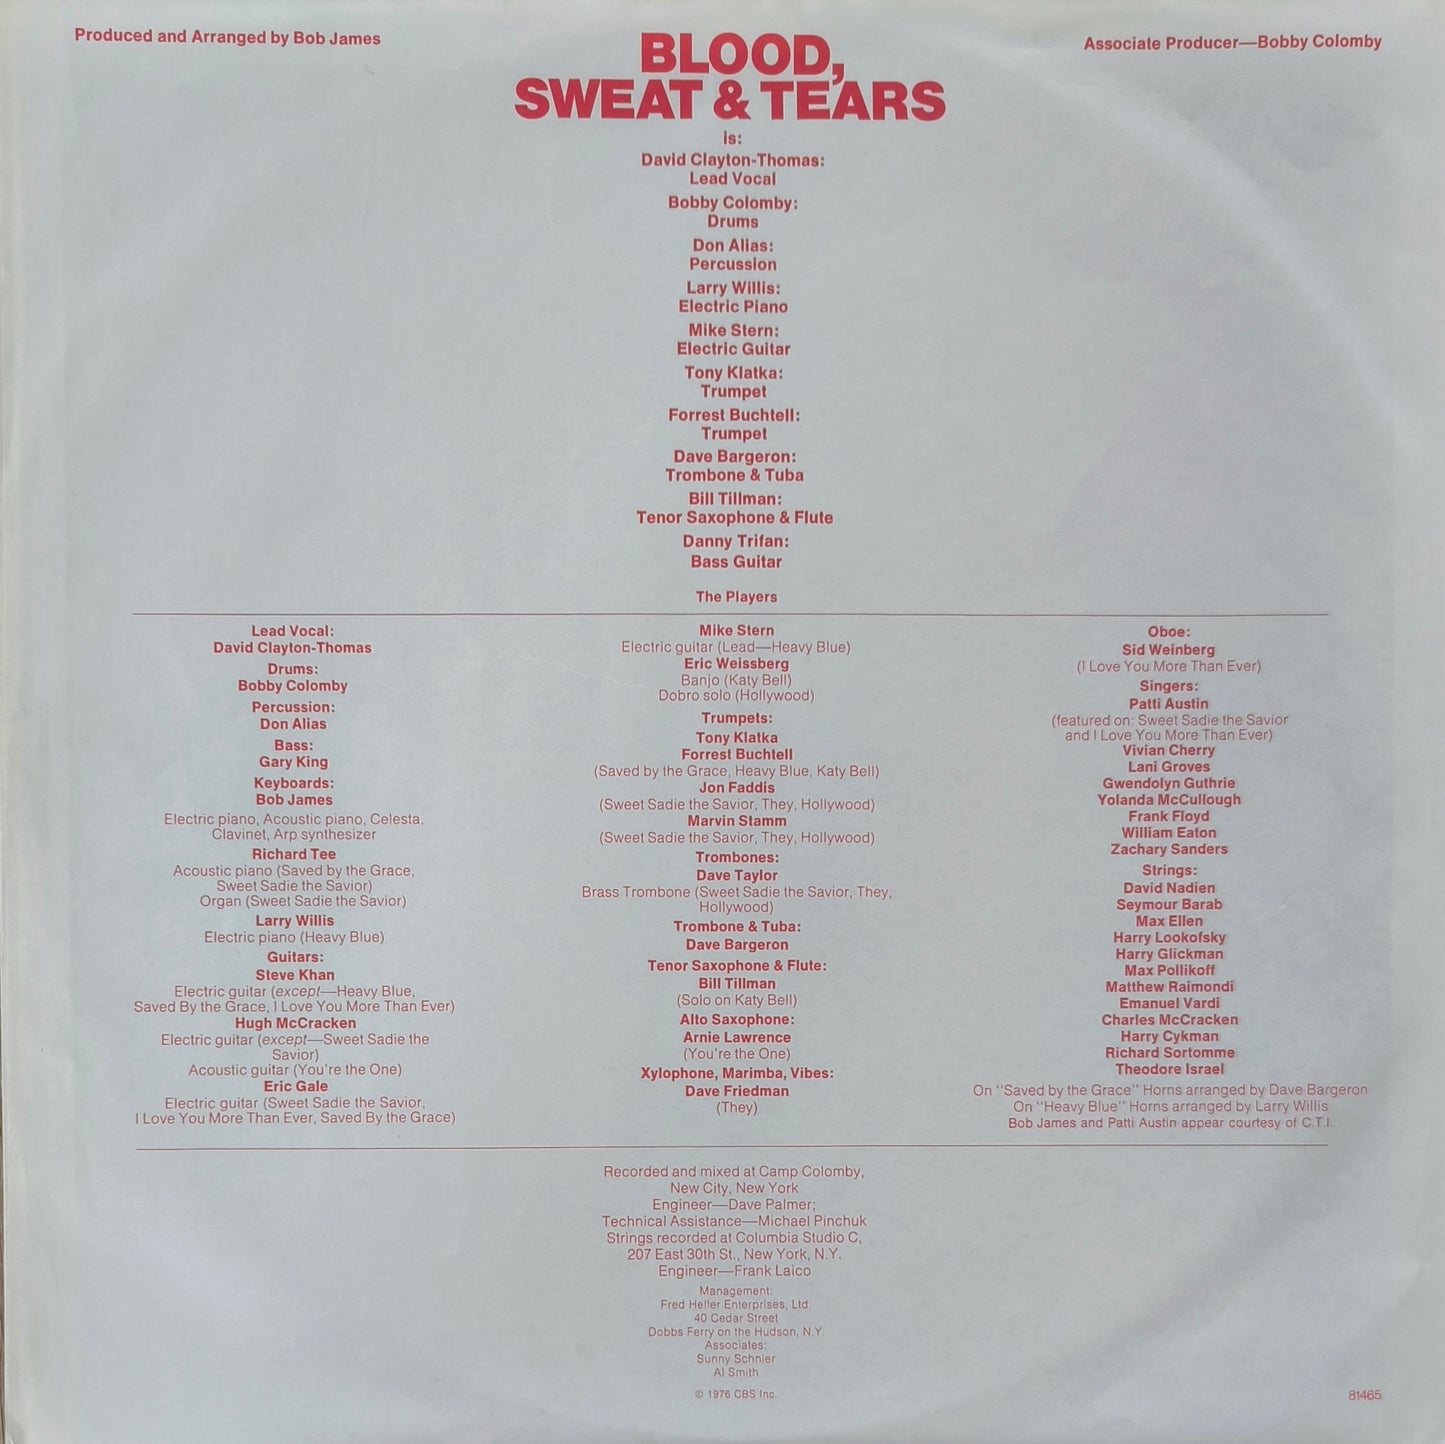 BLOOD, SWEAT & TEARS - More Than Ever